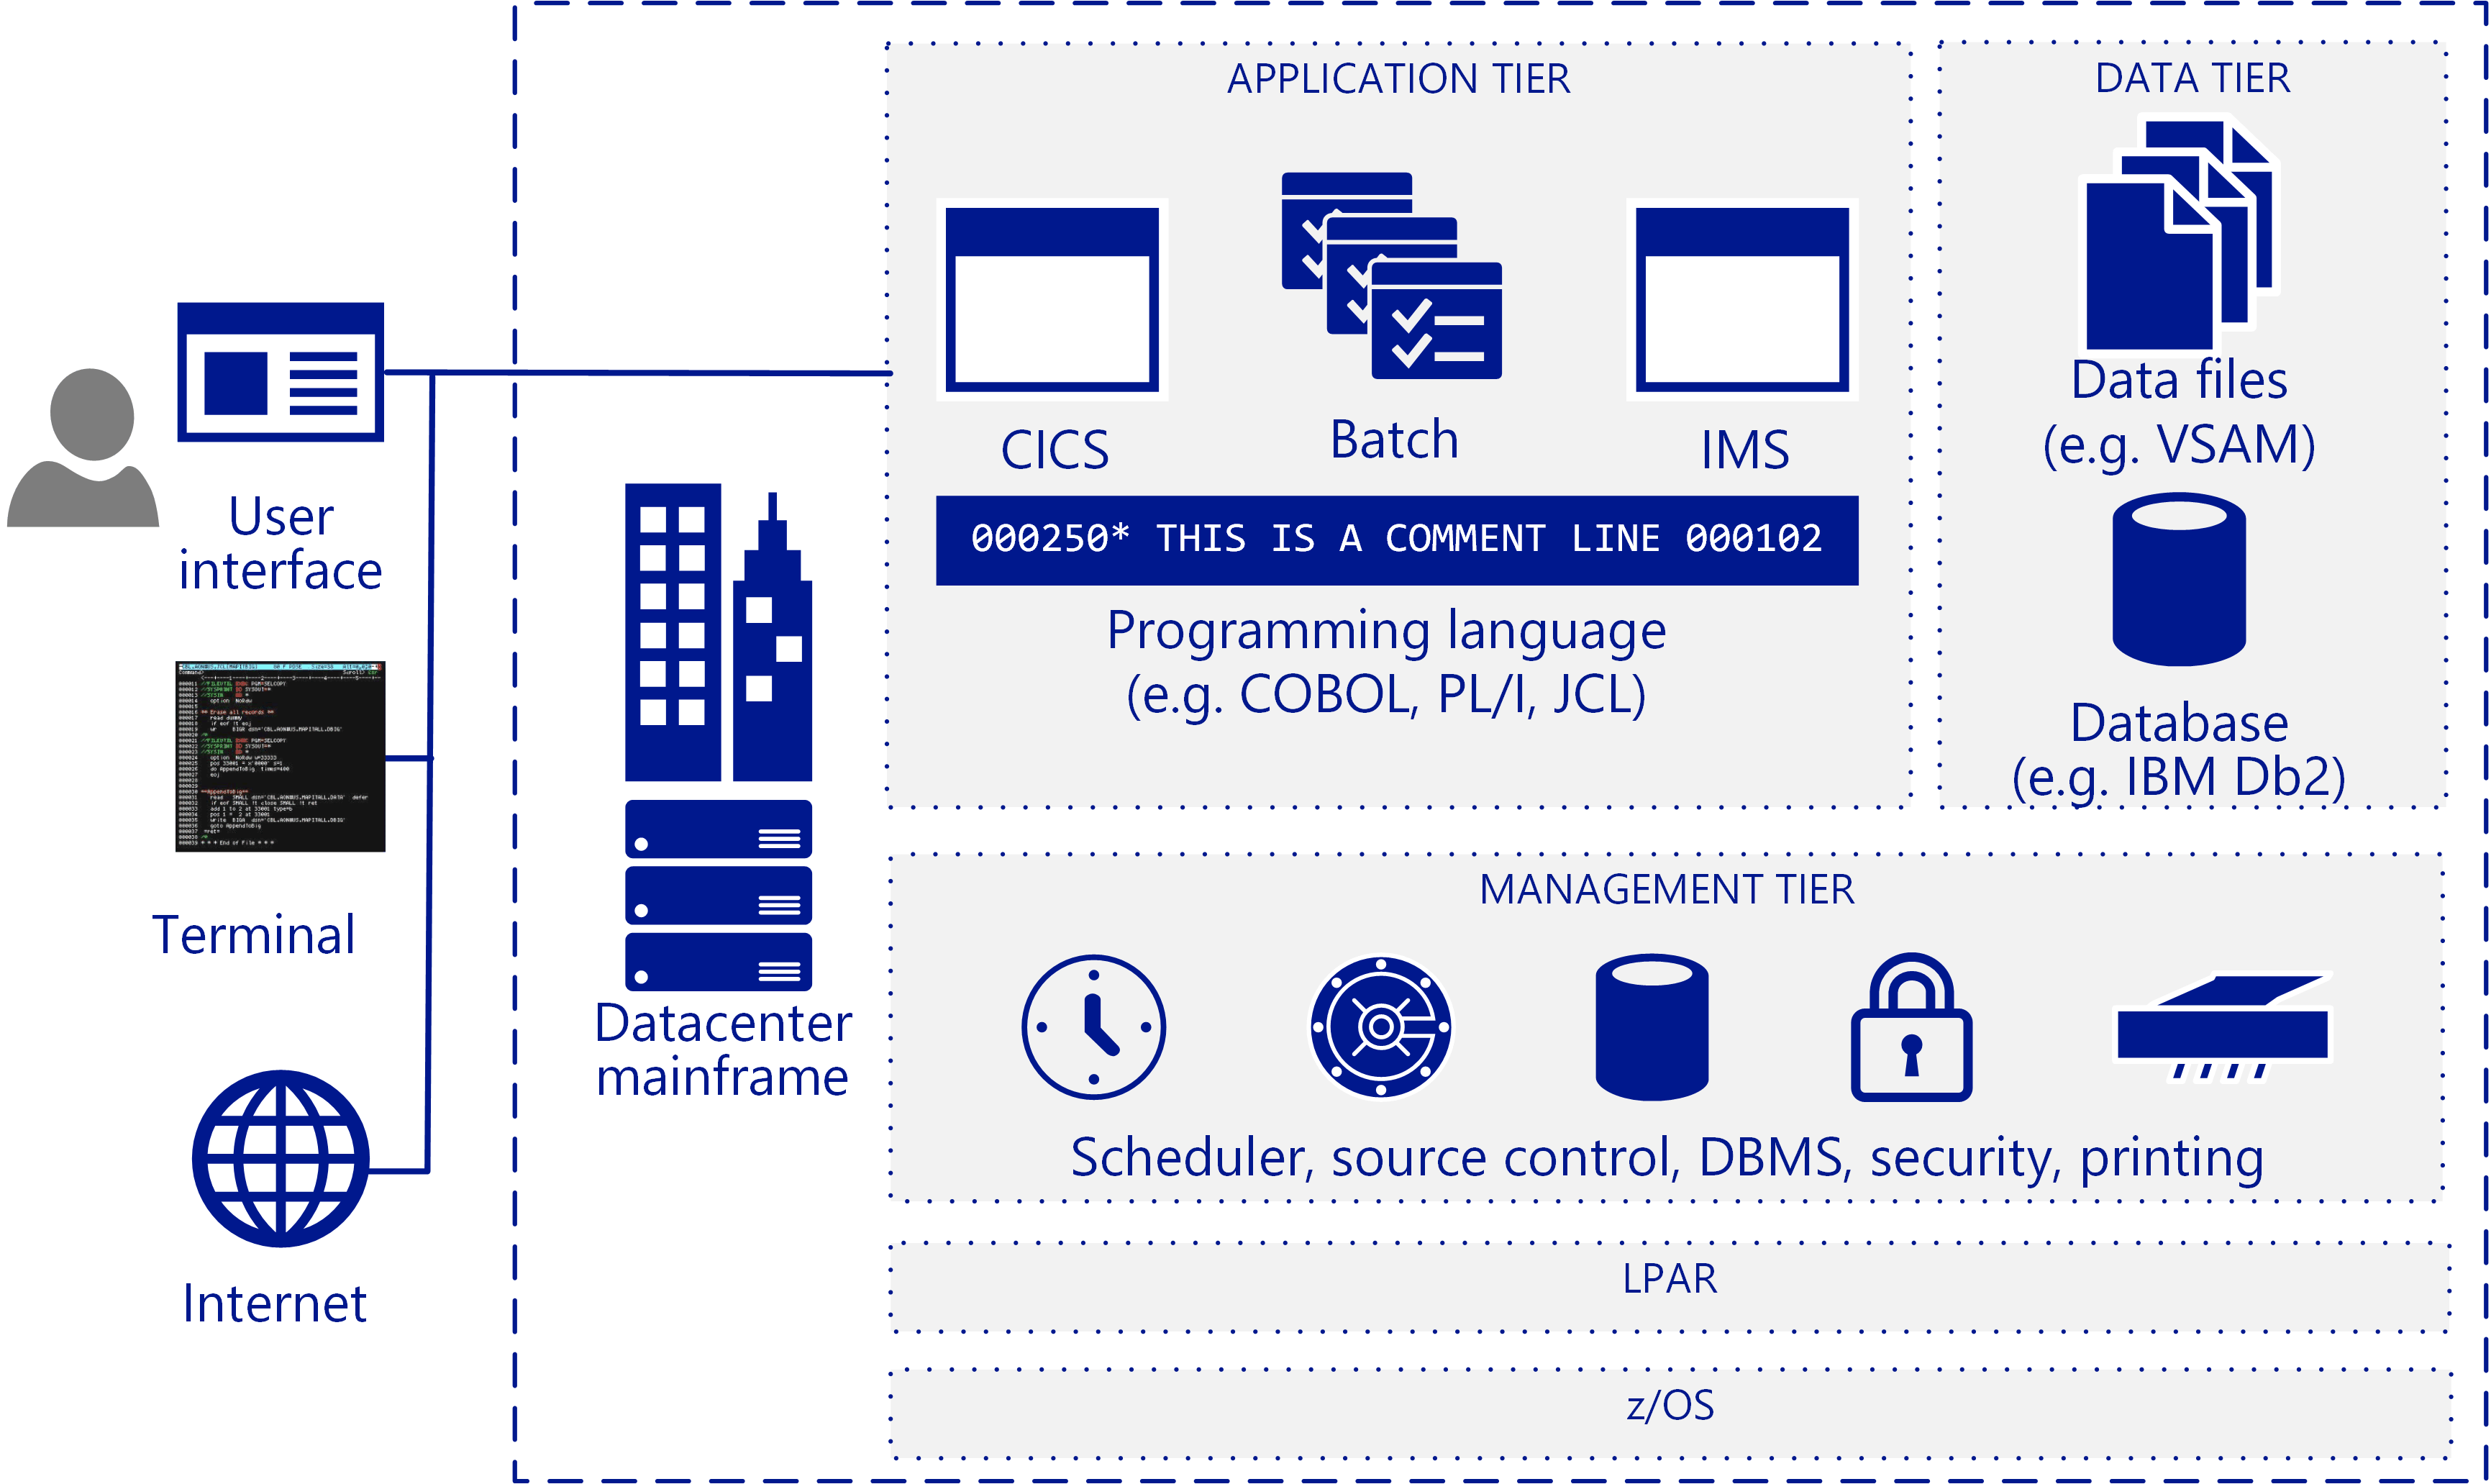 Components in a typical IBM mainframe architecture